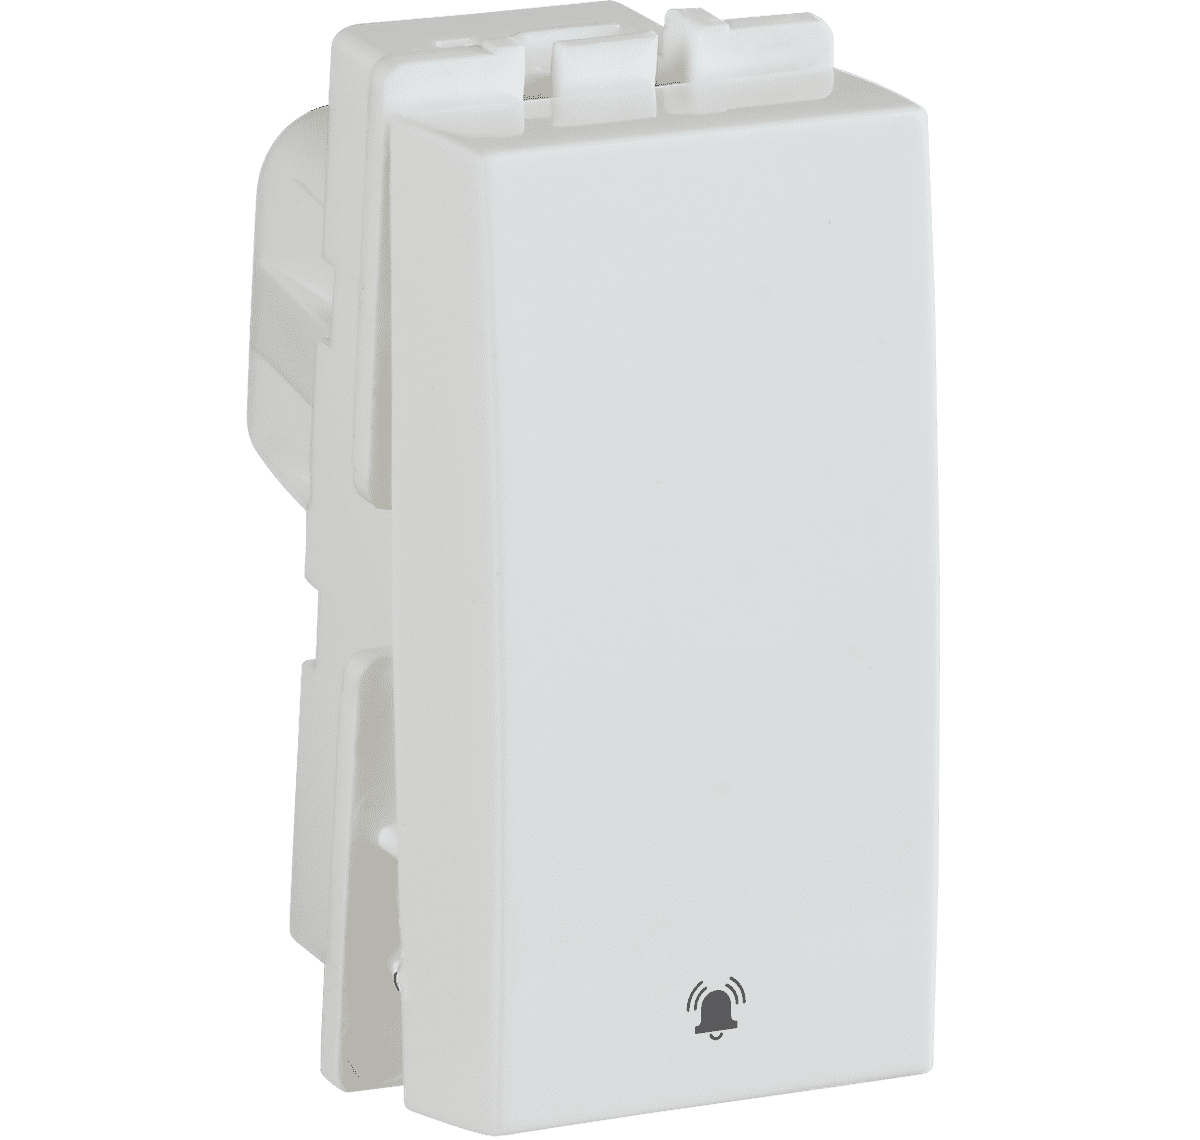 Crabtree - 10 A Bell Push Switch 